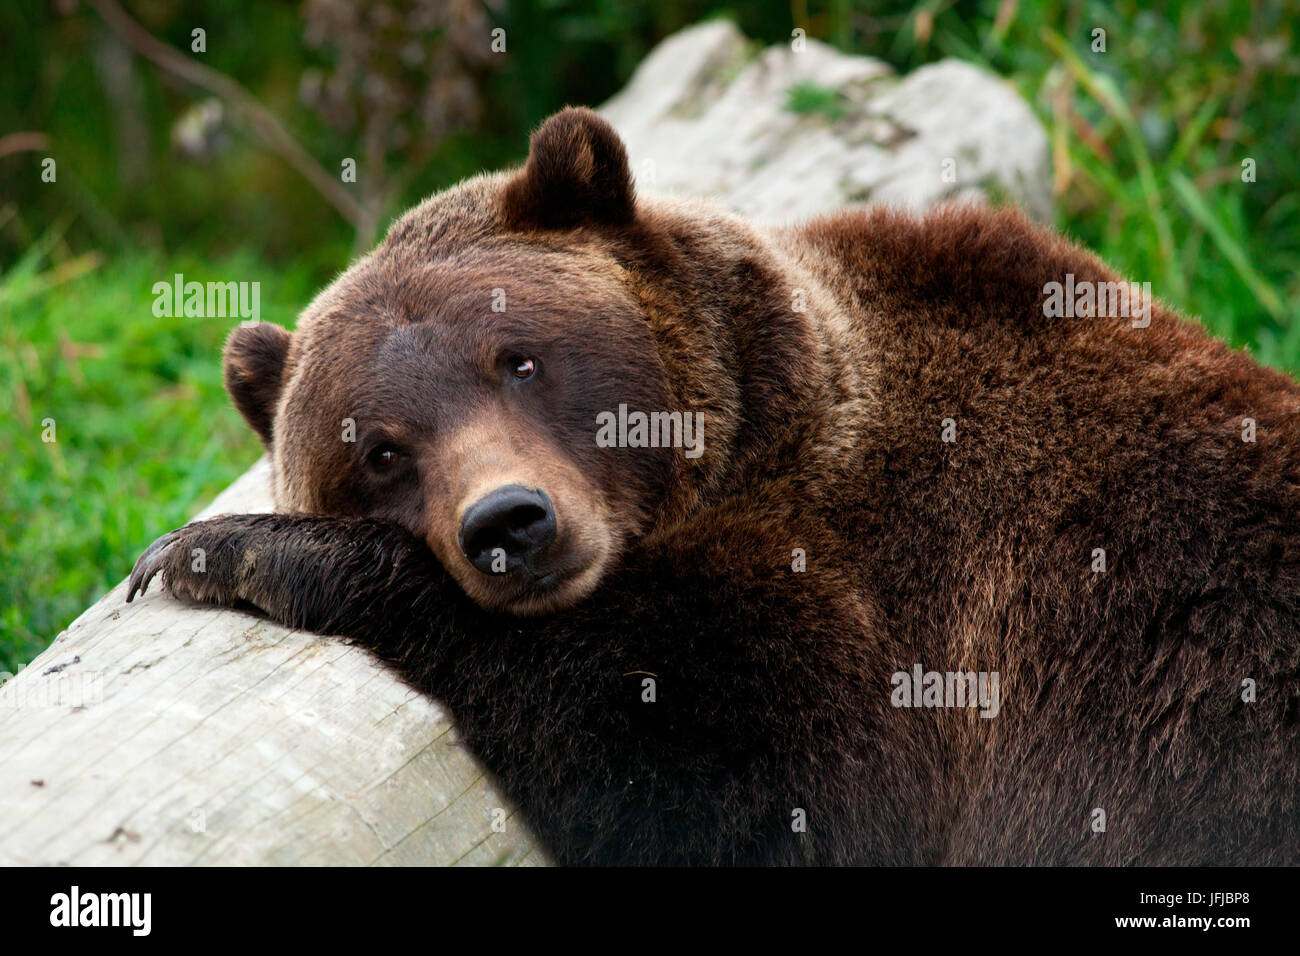 A grizzly bear taking a nap on a log Stock Photo